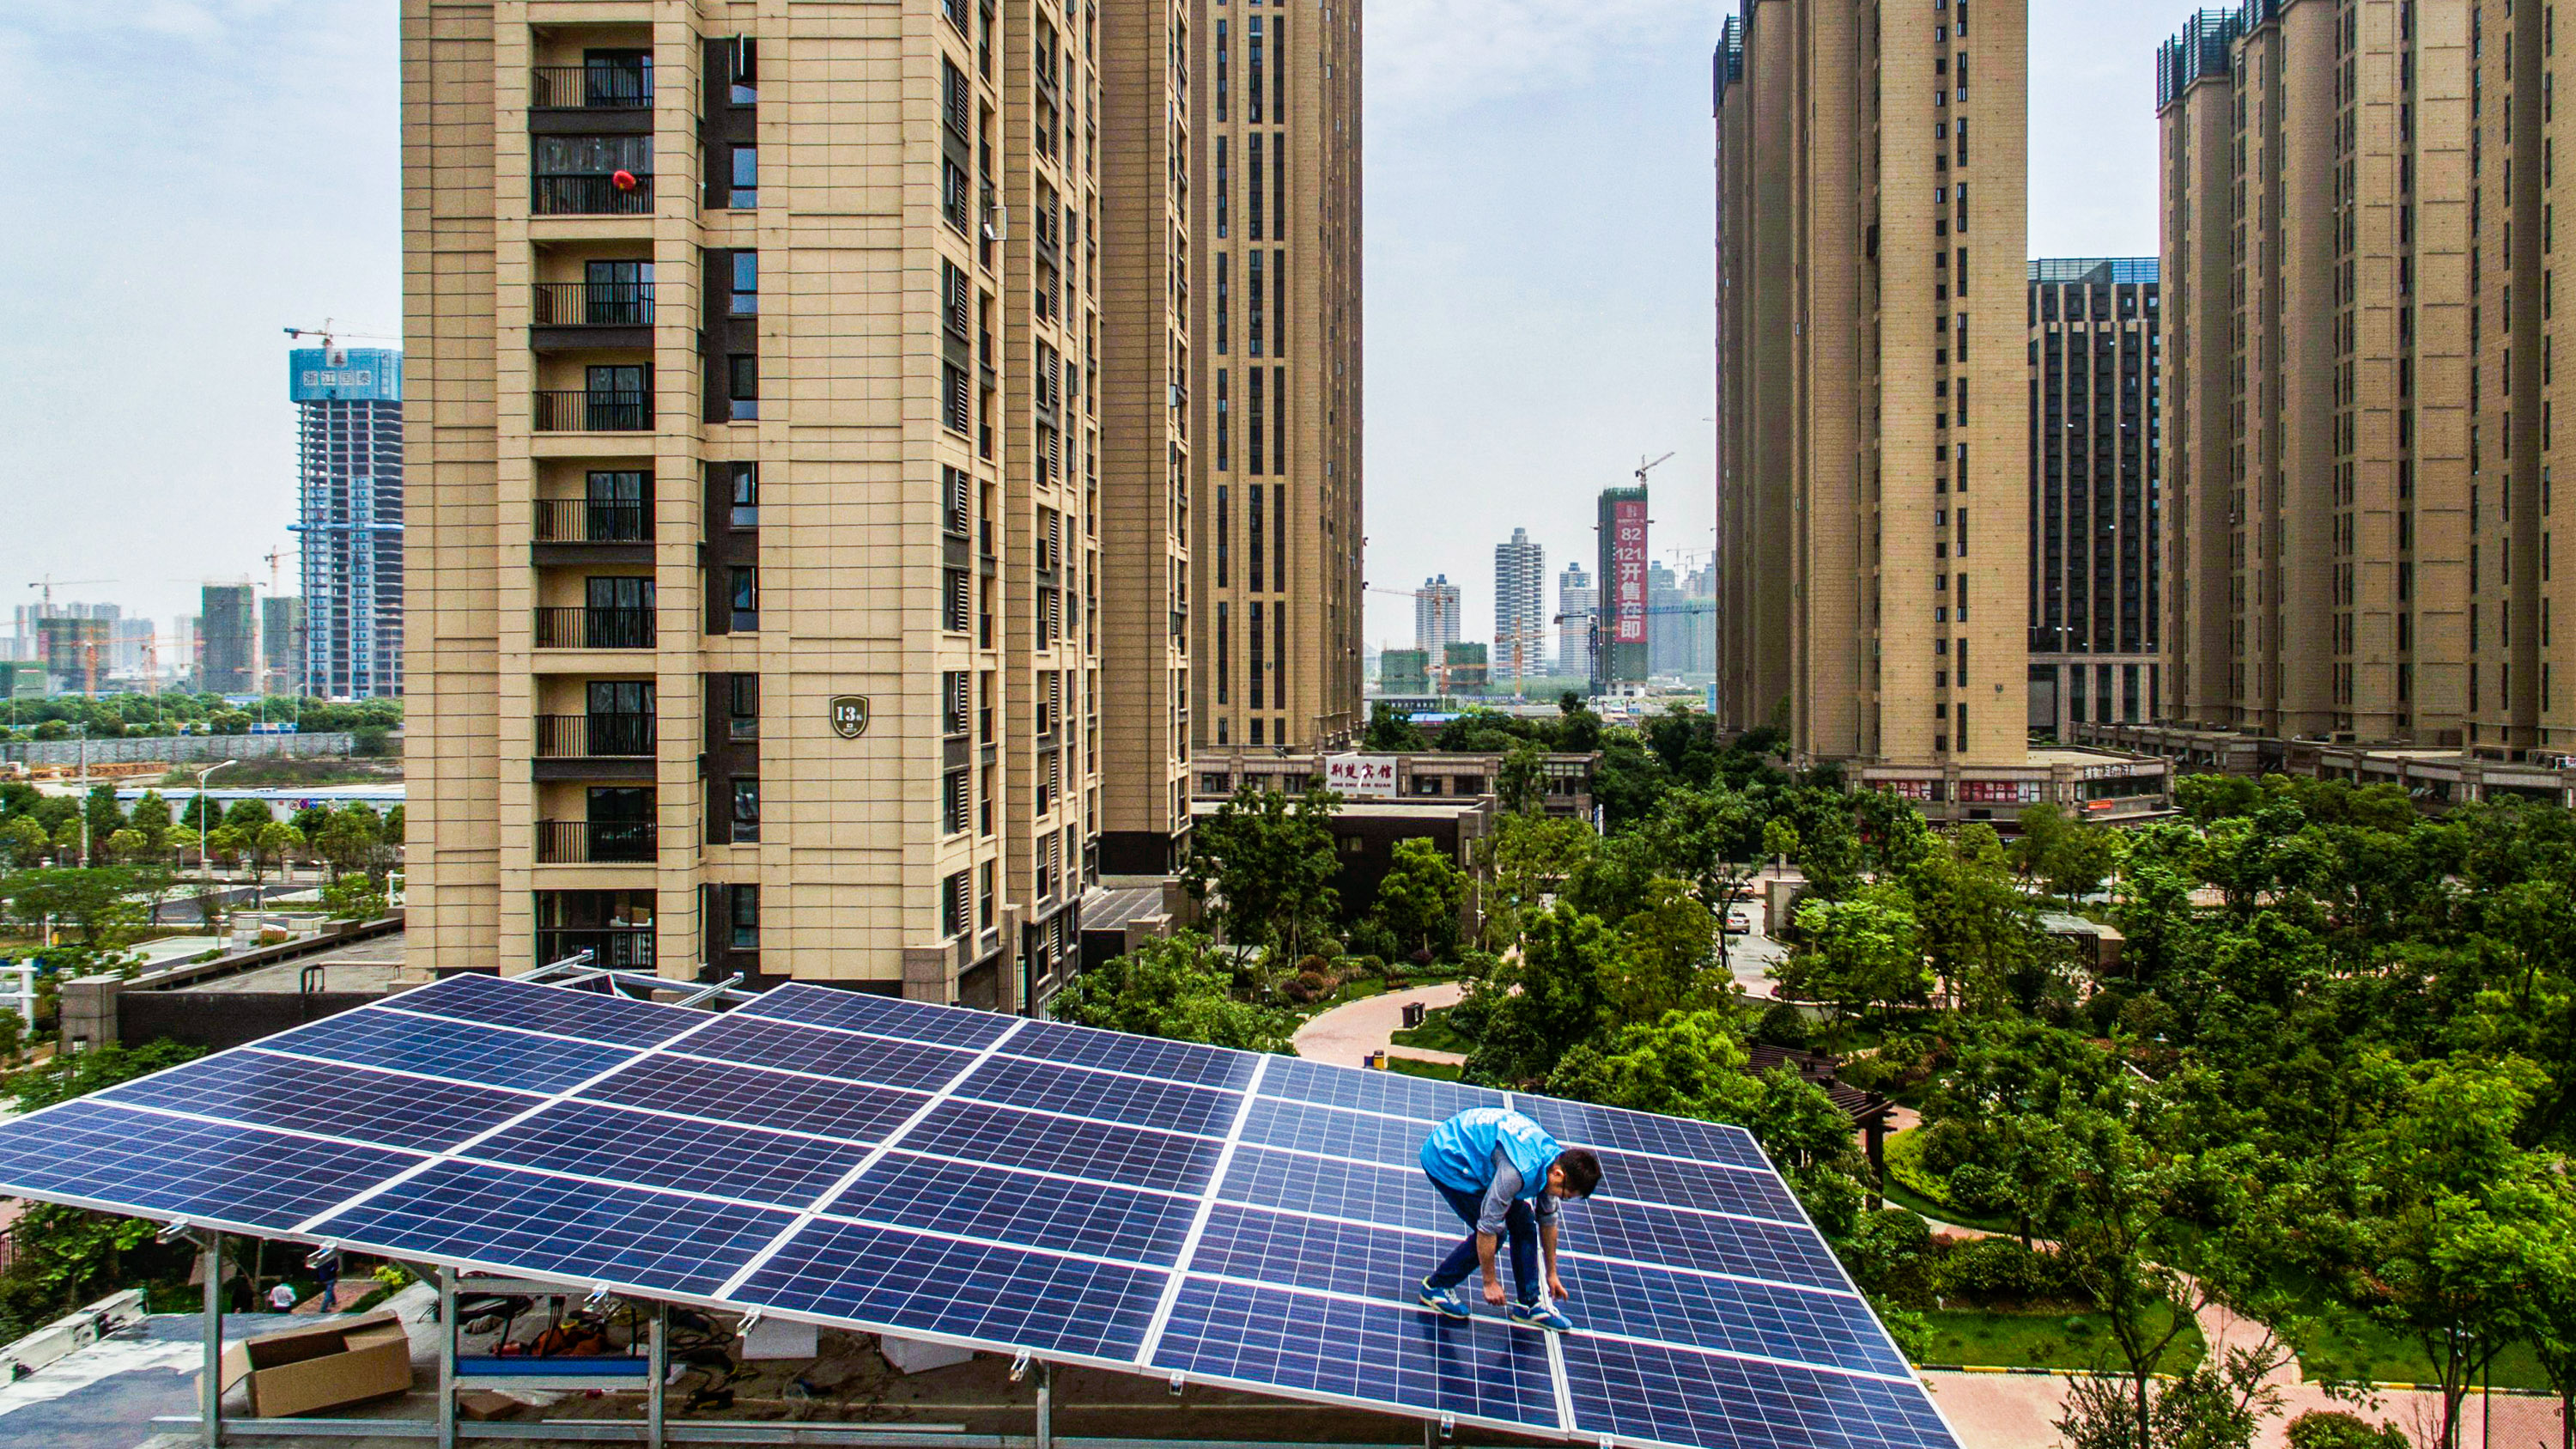 Workers of Wuhan Guangsheng Photovoltaic Company installed solar panels on the roof of the building